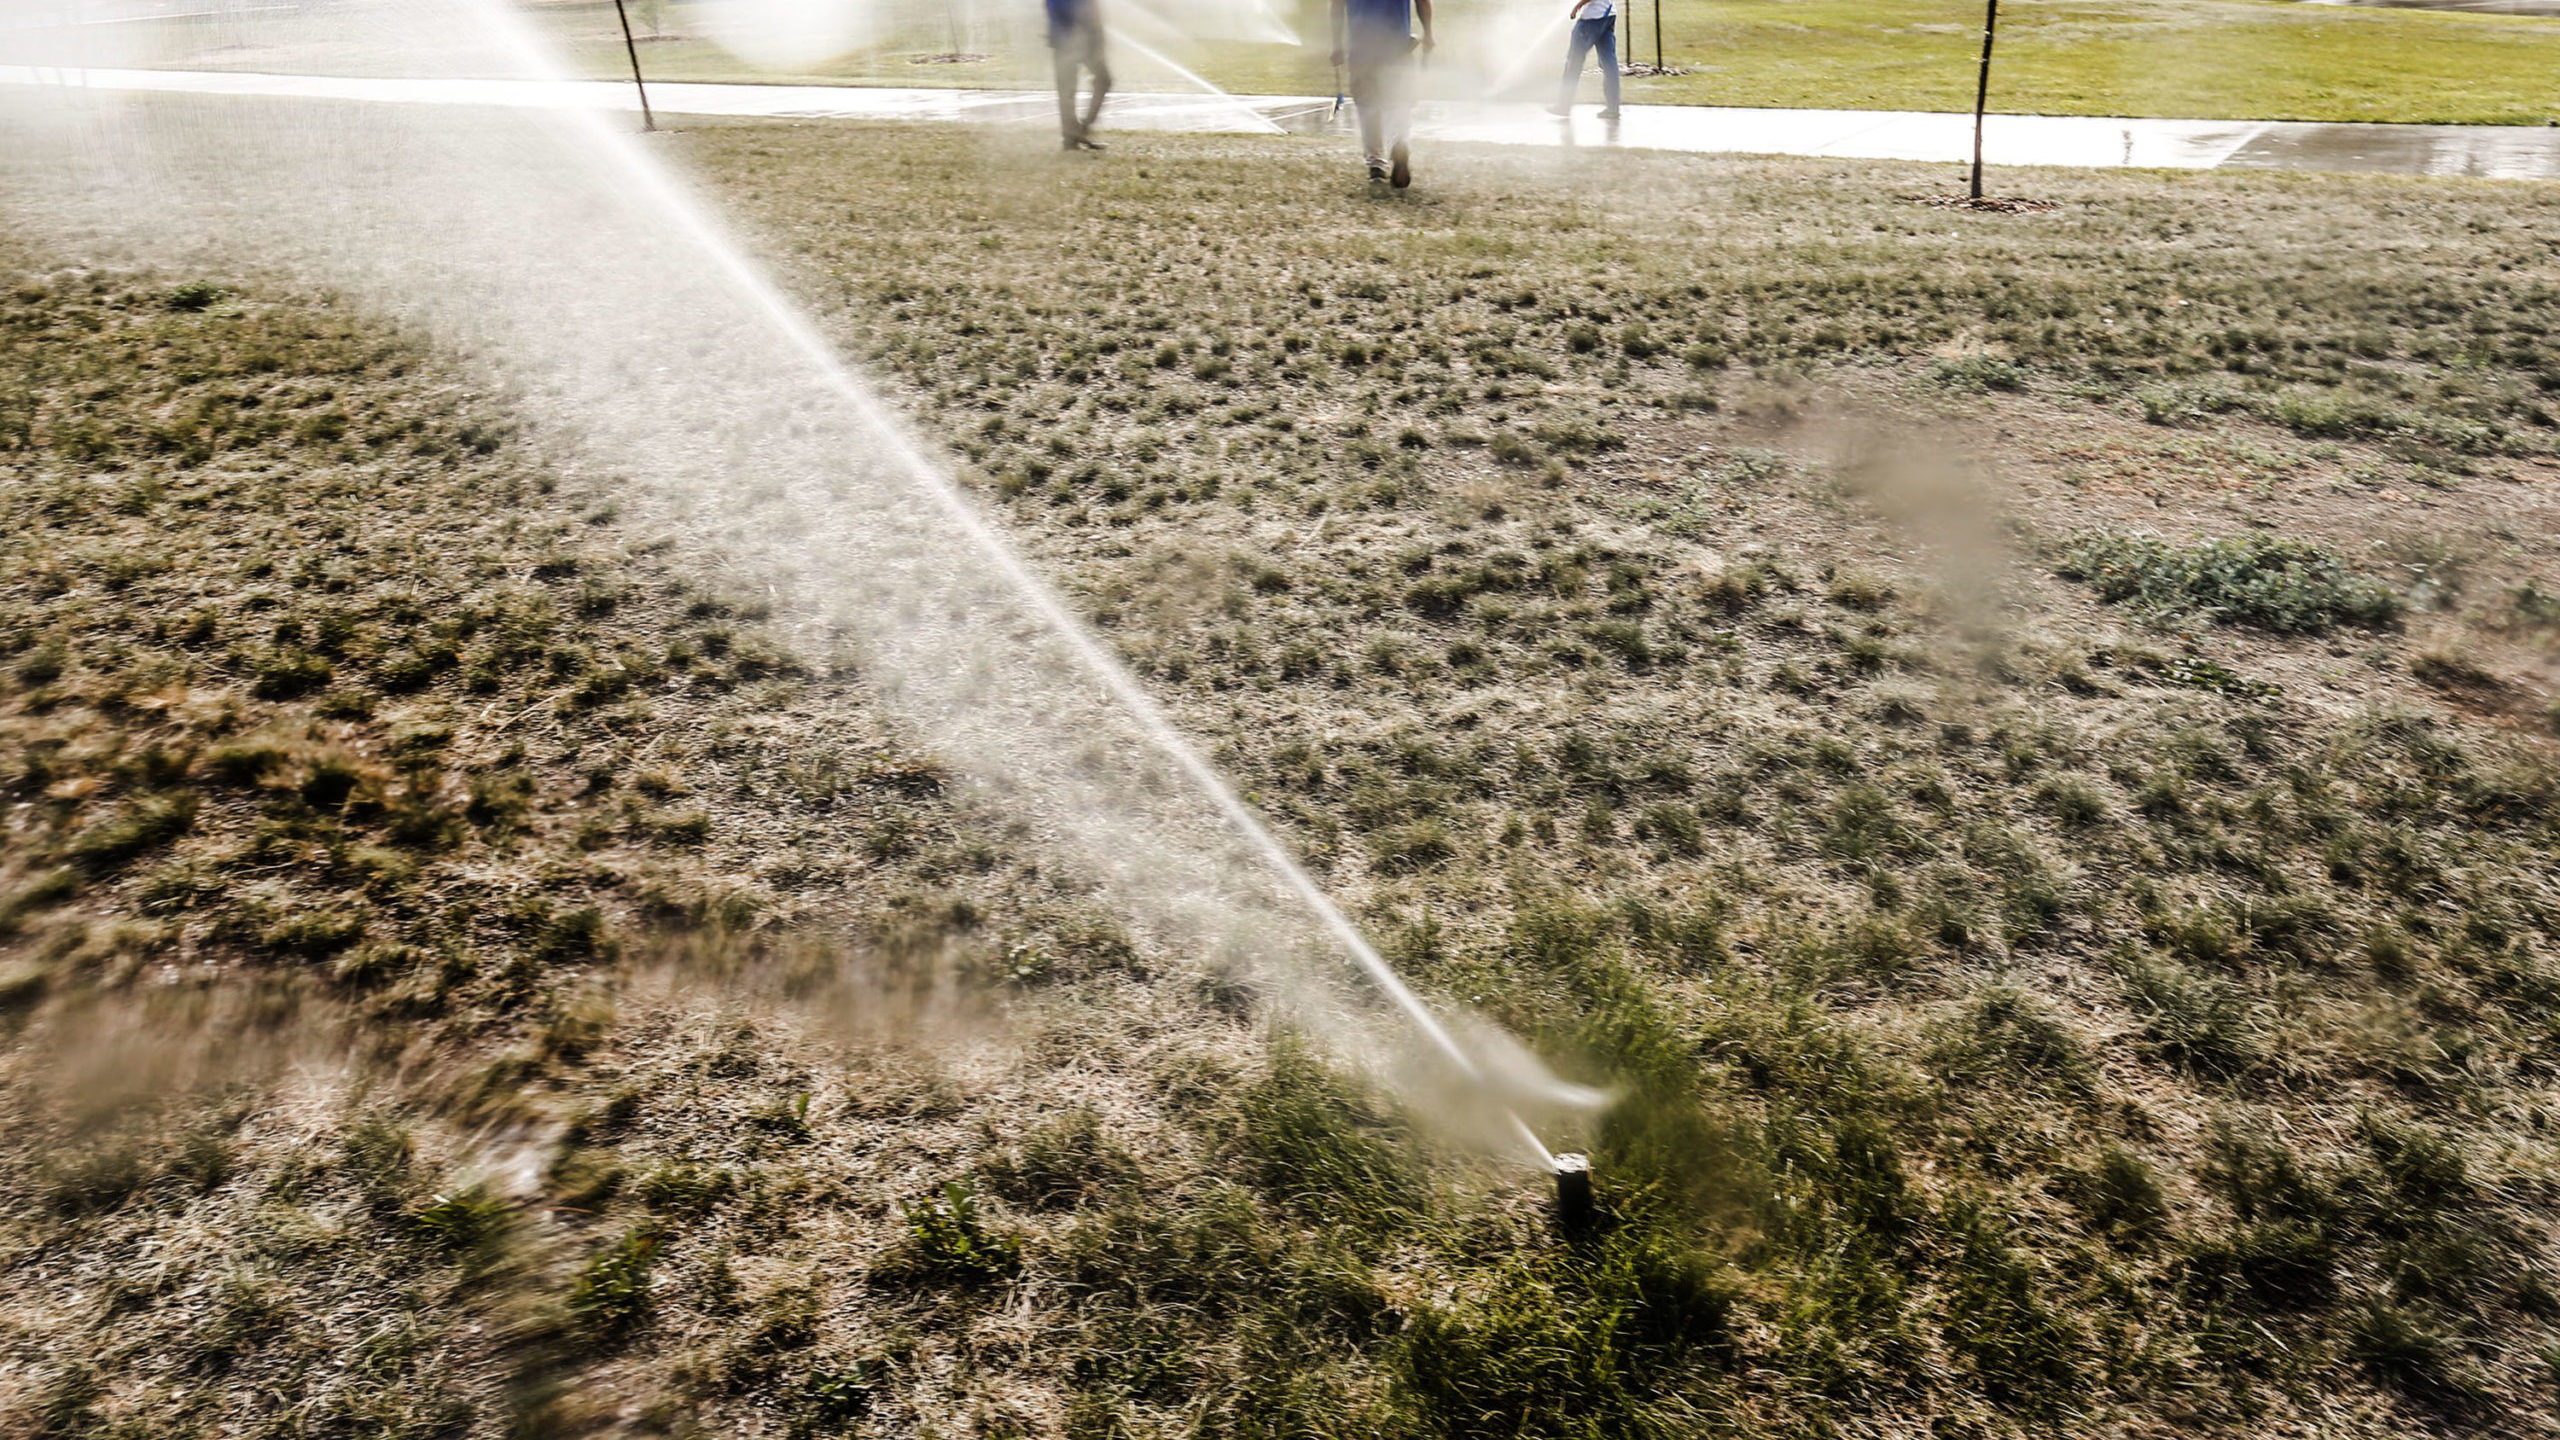 Sprinkler watering lawn pictured, ogden water system will get an update...